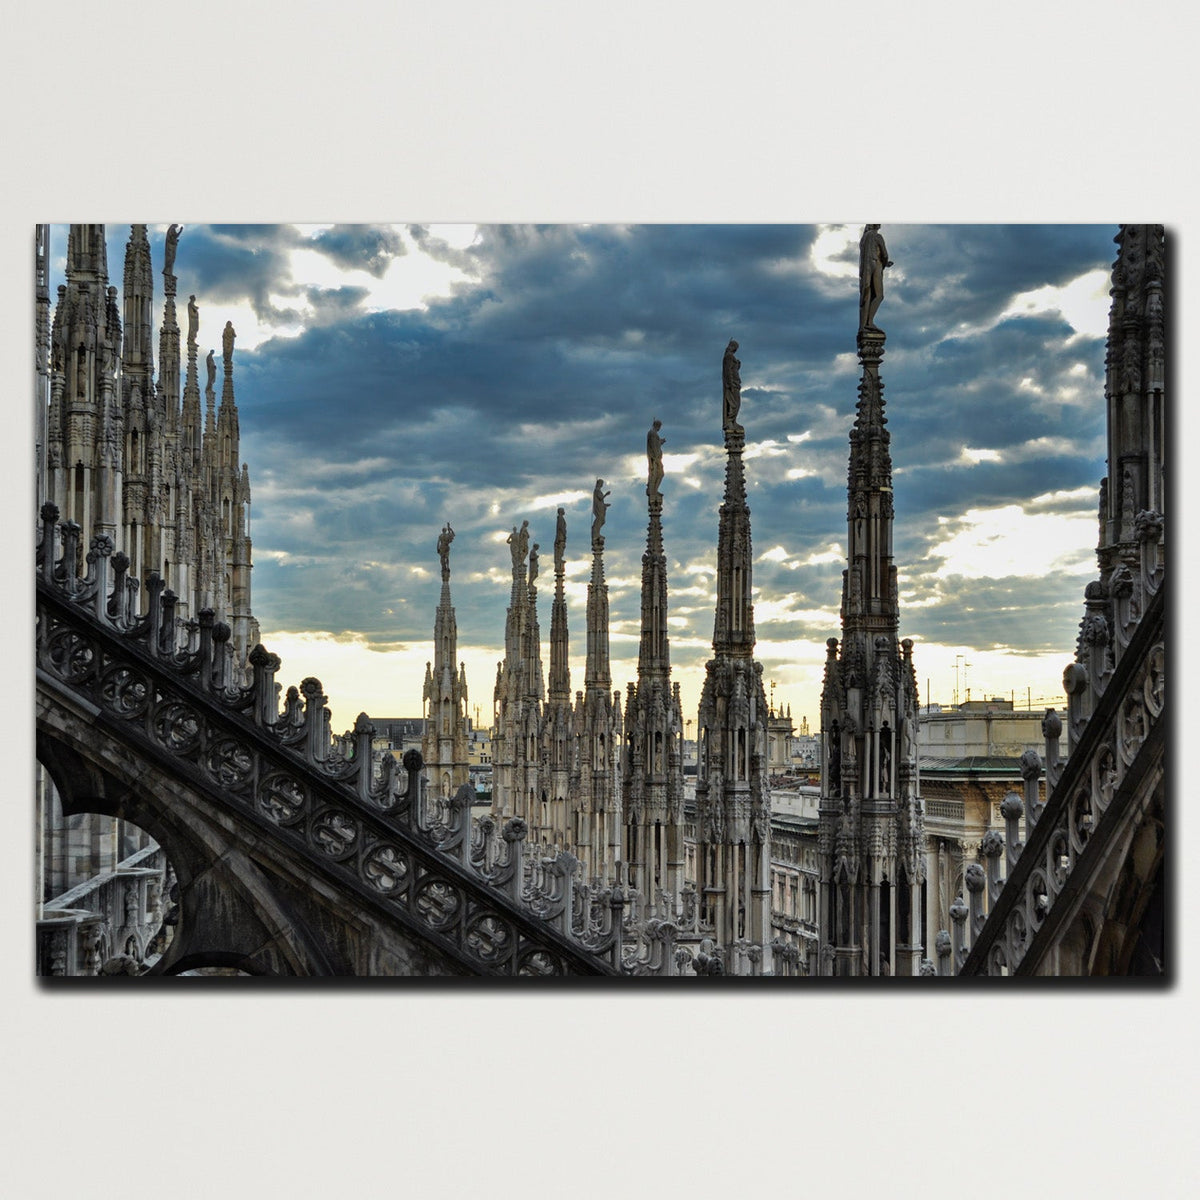 https://cdn.shopify.com/s/files/1/0387/9986/8044/products/RoofTerracesofCathedralDuomoCanvasArtprintStretched-Plain.jpg